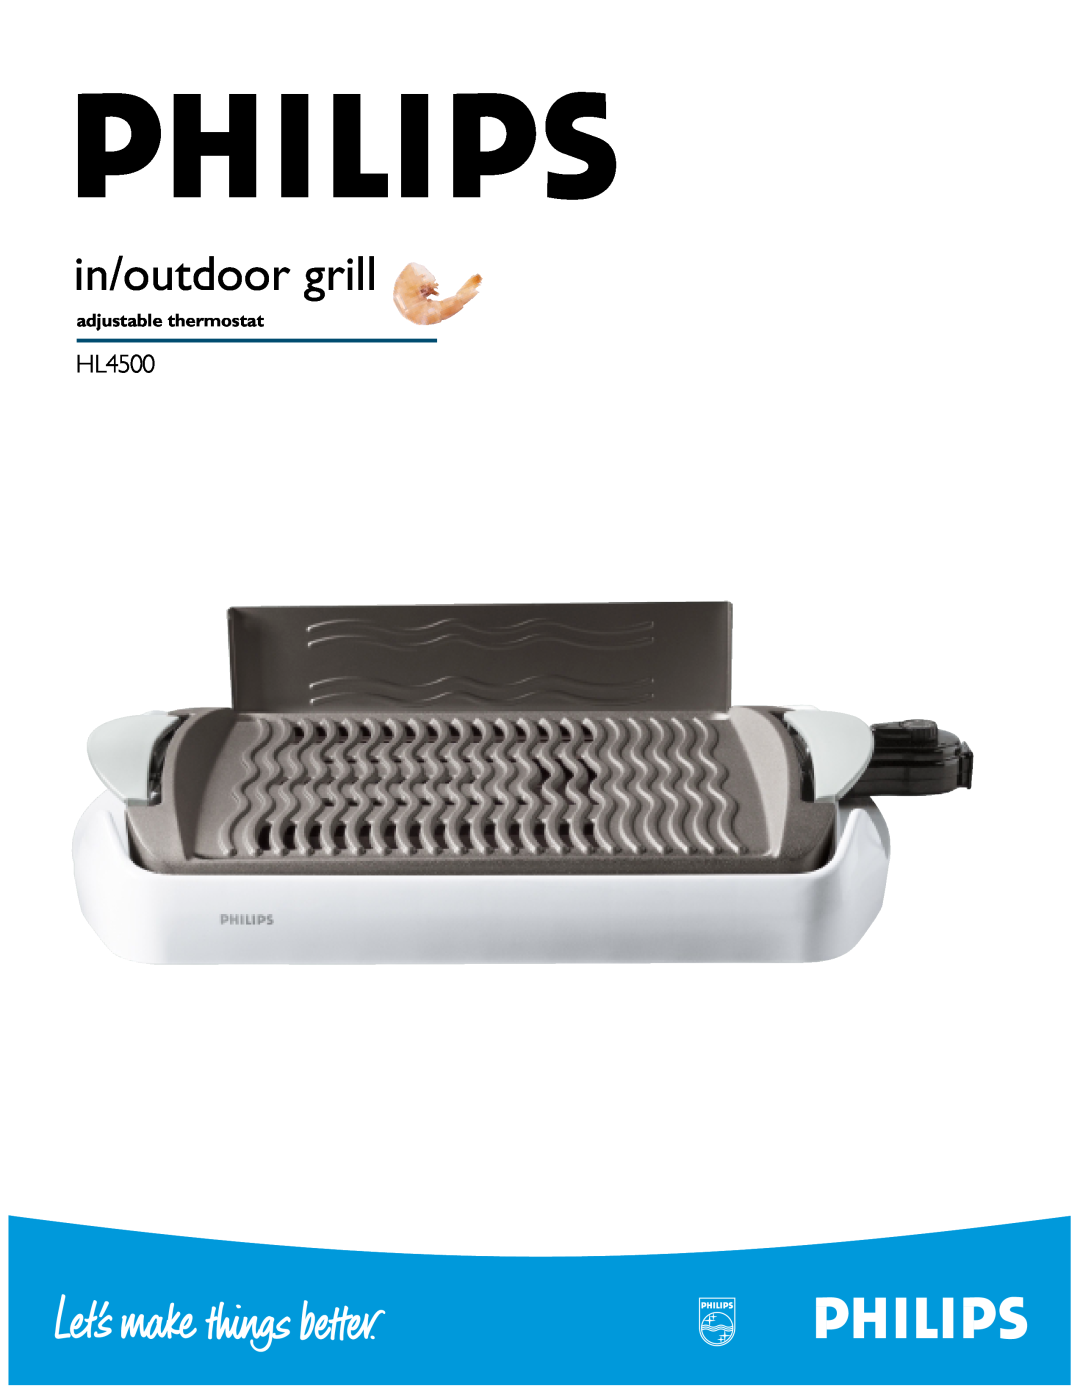 Philips HR2752, hl5231, HR1457 manual in/outdoor grill, HL4500, adjustable thermostat 